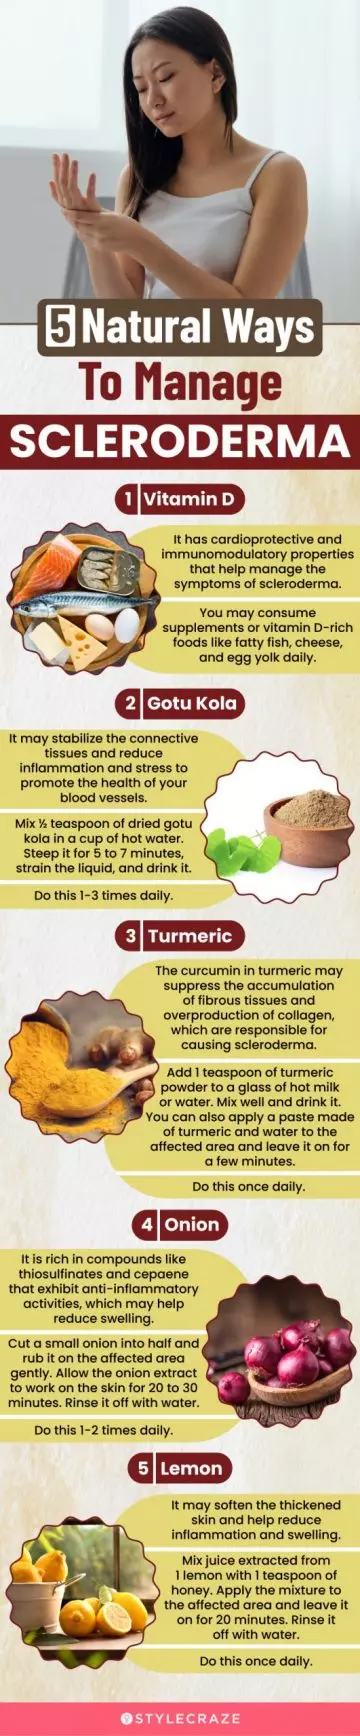 5 natural ways to manage scleroderma (infographic)